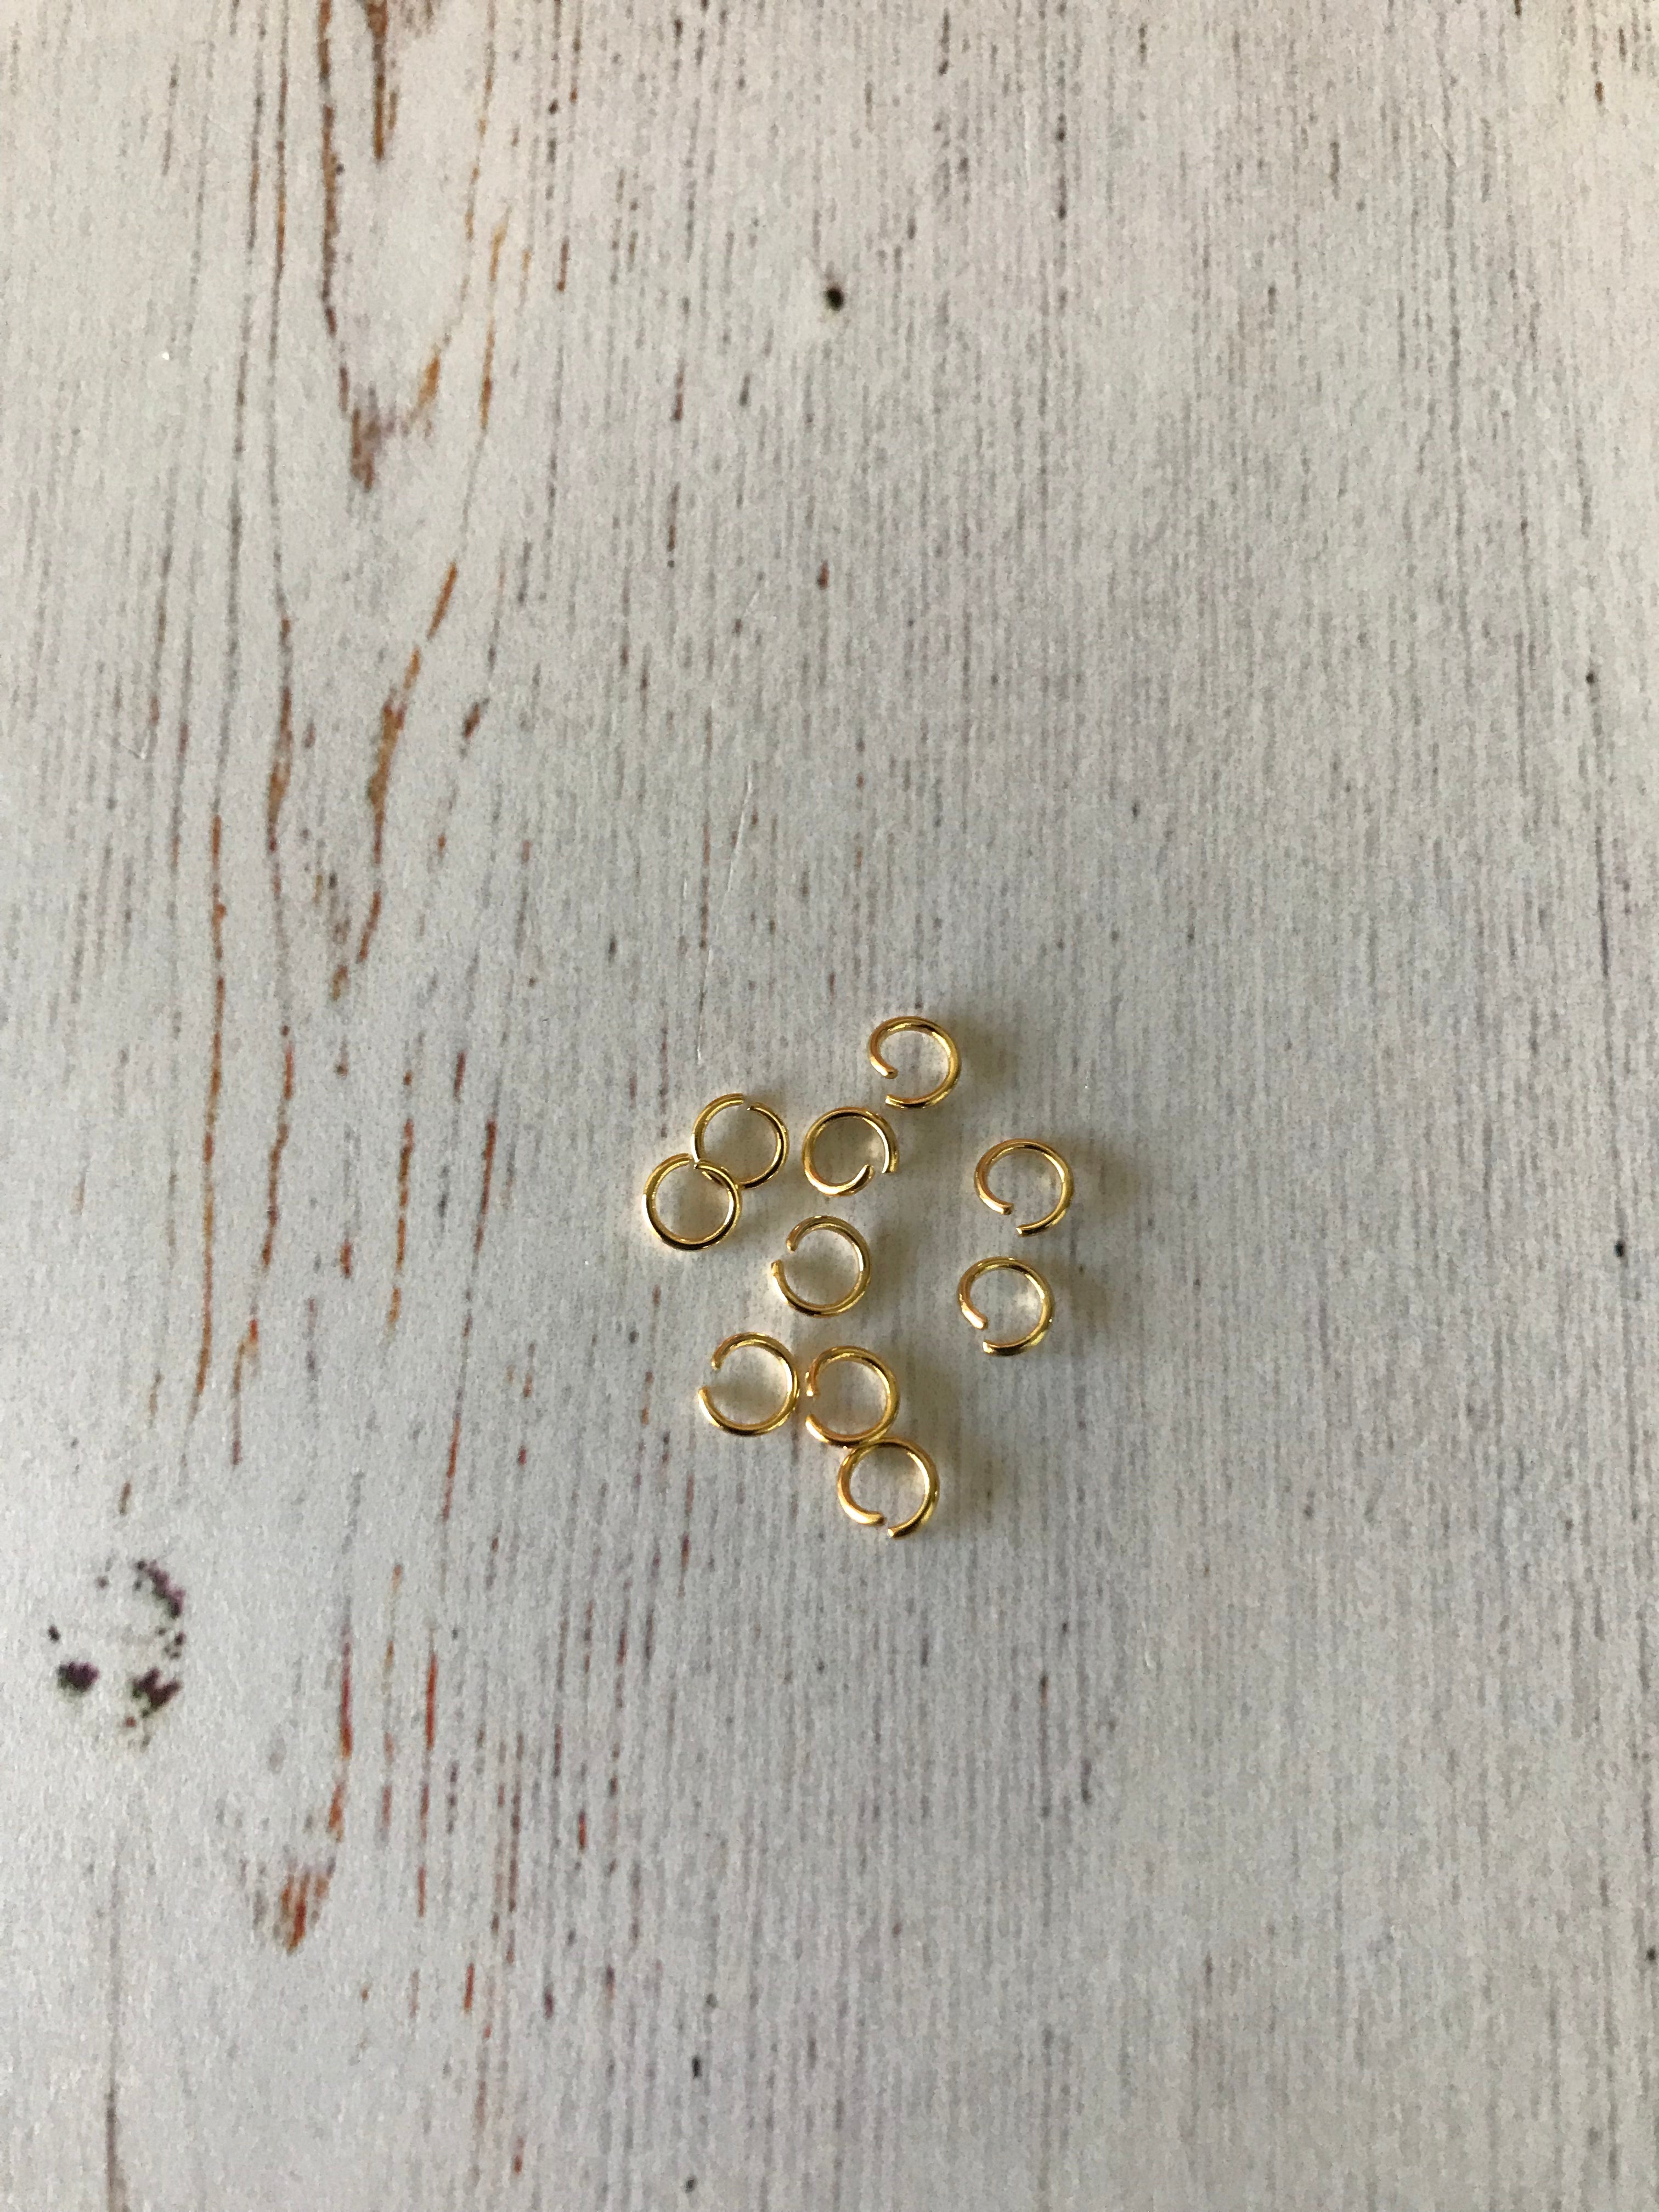 304 Stainless Steel - Golden Open Jump Rings (4x0.6mm) (5 Pairs)